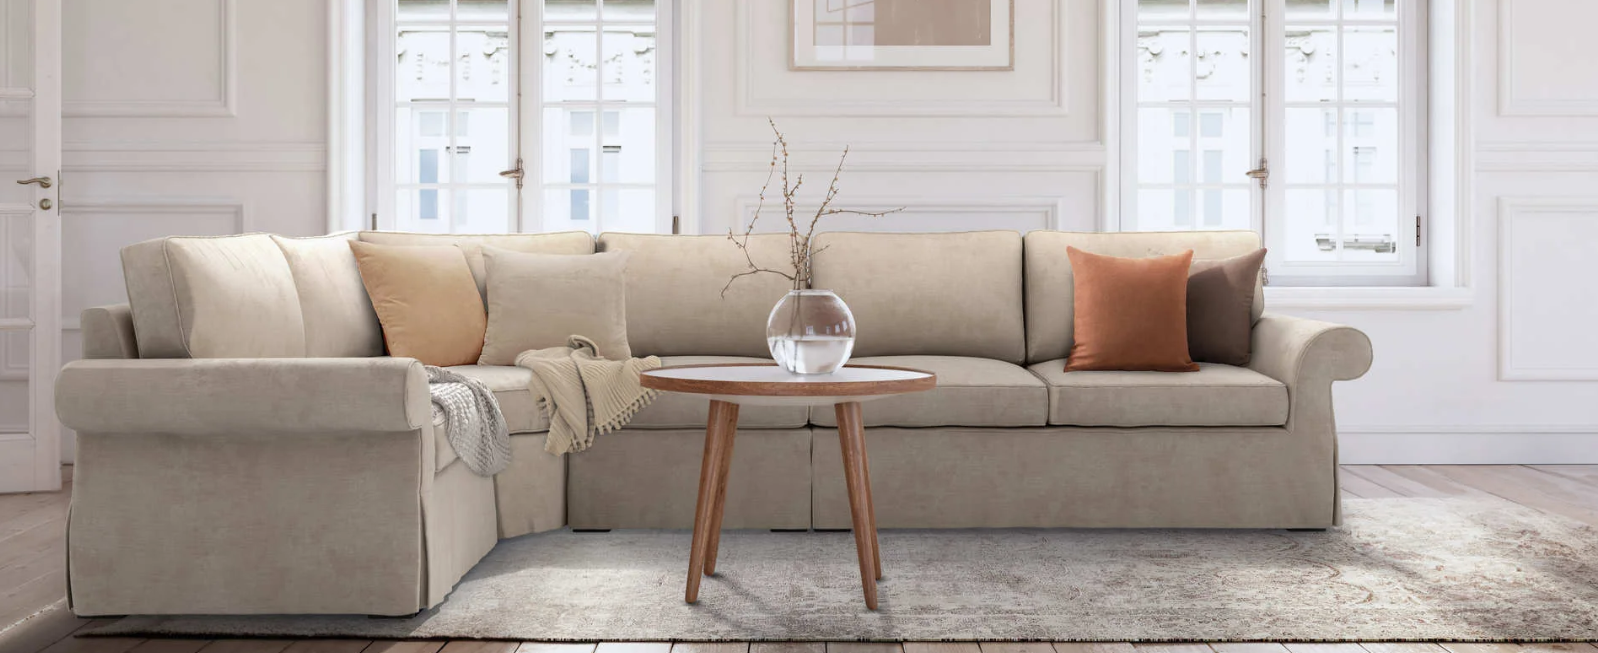 Pottery Barn Pearce Roll Arm Sofa - classic and comfortable seating option for any living room